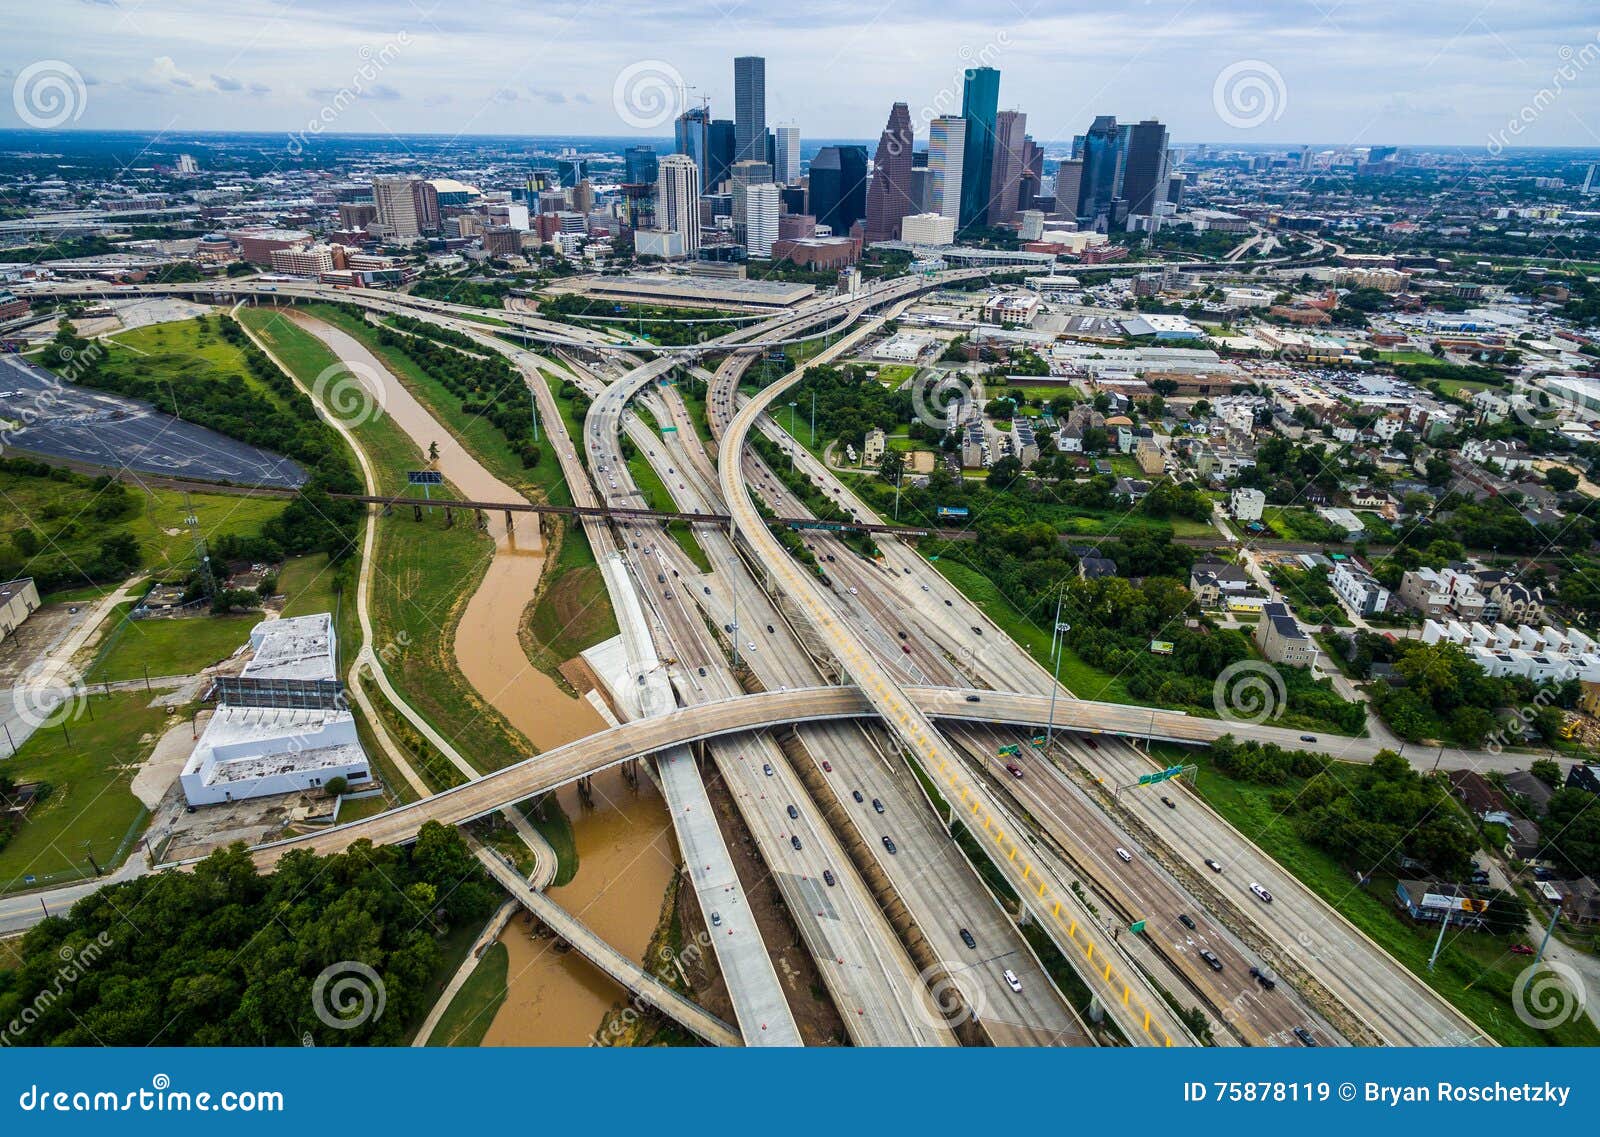 urban sprawl bridge and overpasses high aerial drone view over houston texas urban highway view